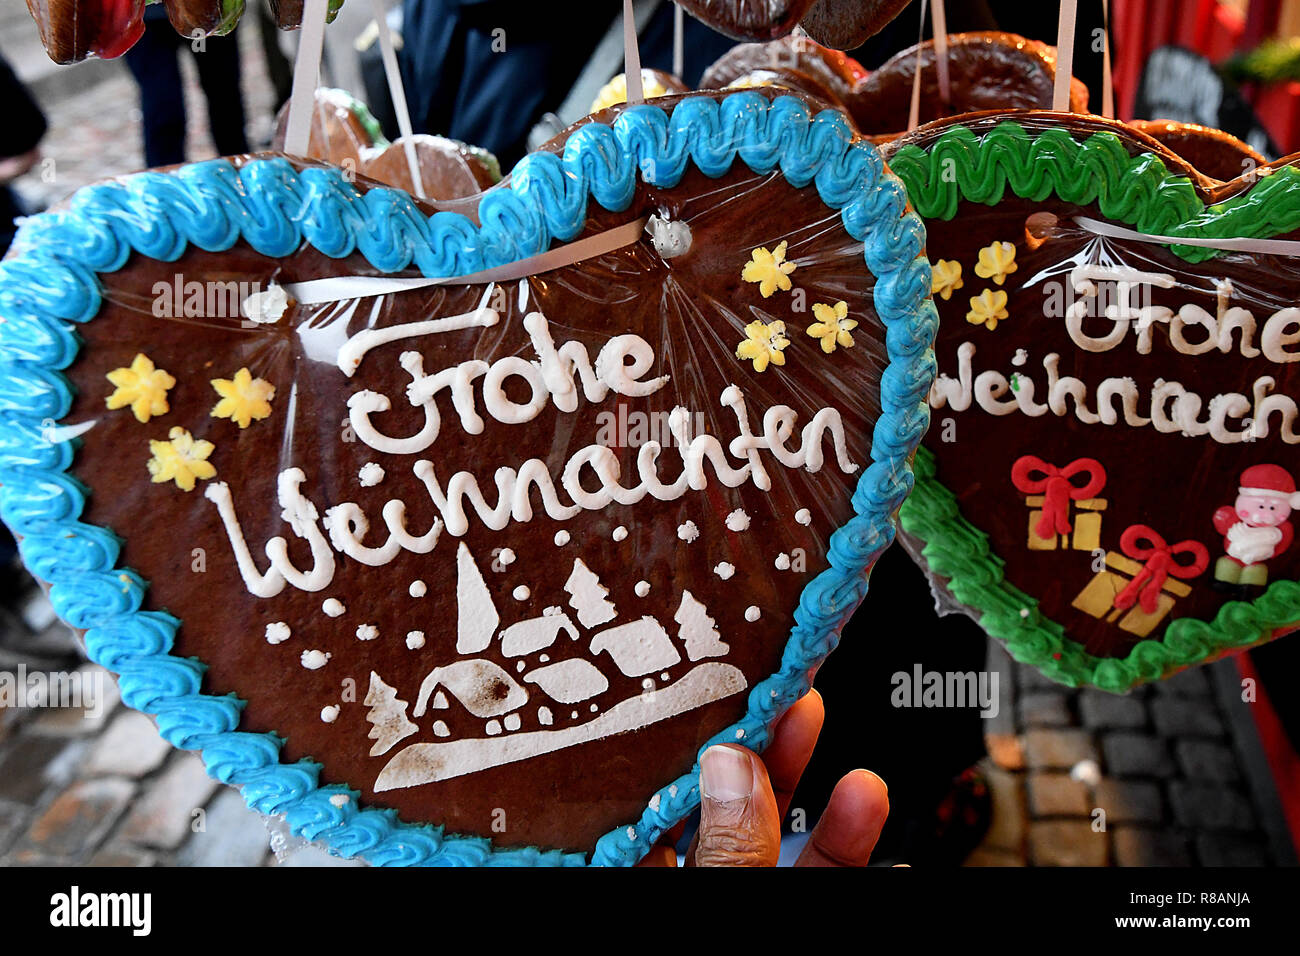 Copenhagen Denmark 14th Dec 2018 Gingerbread Cookies With Festive Messages At Christmas Market On Hojbrogade In